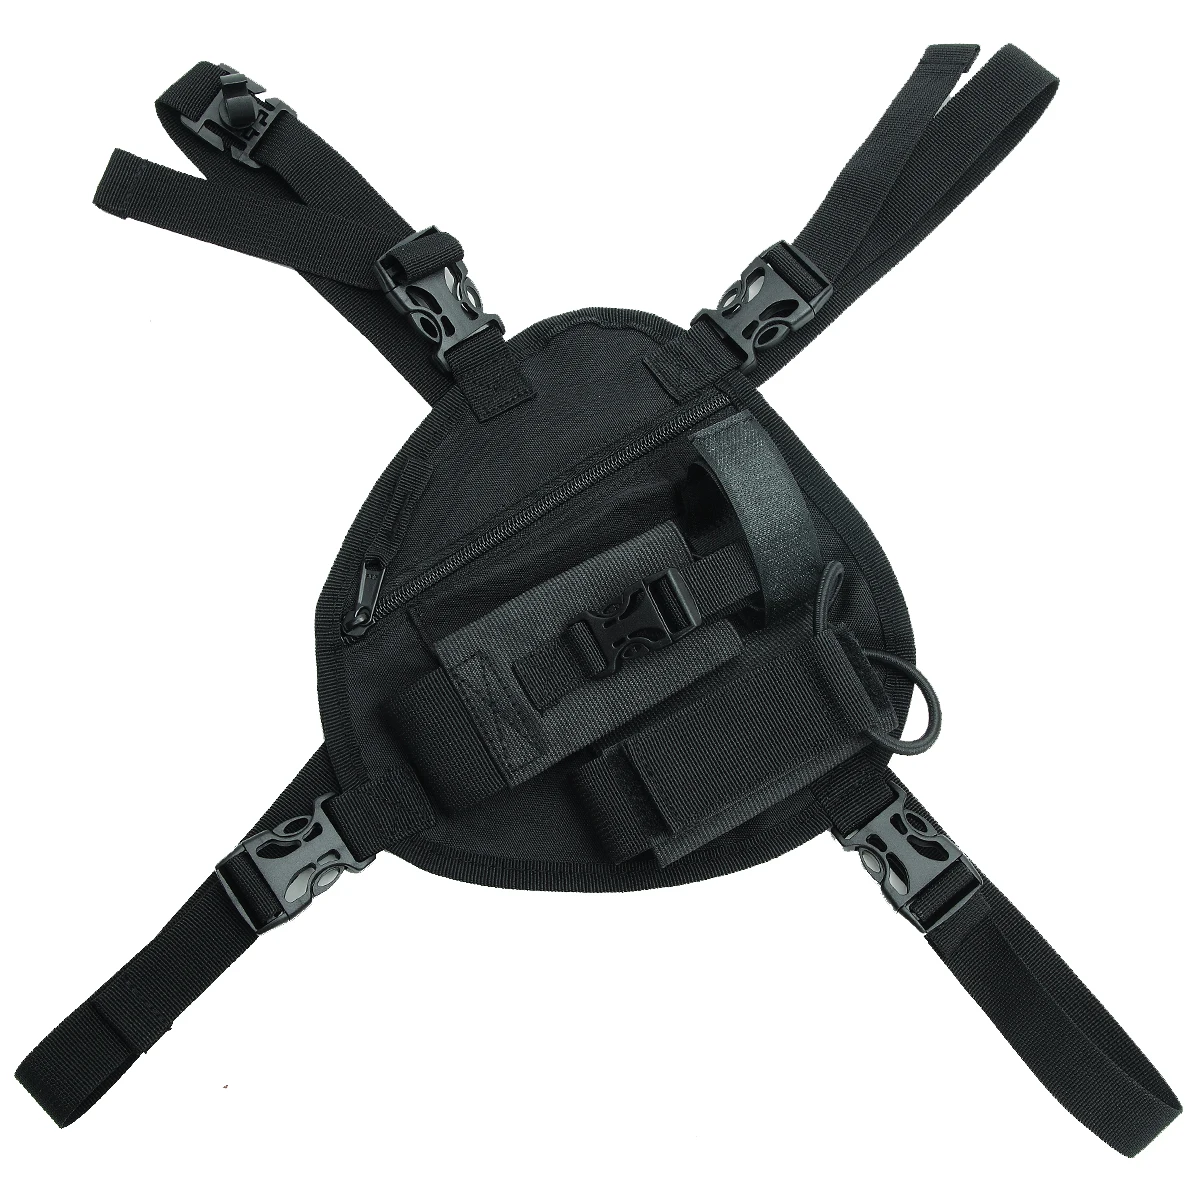 Walkie Talkie Harness Chest Front Pack Pouch Holster Carry Bag for Baofeng UV-5R UV-13 PRO UV-9R BF-888S TYT Motorola enlarge